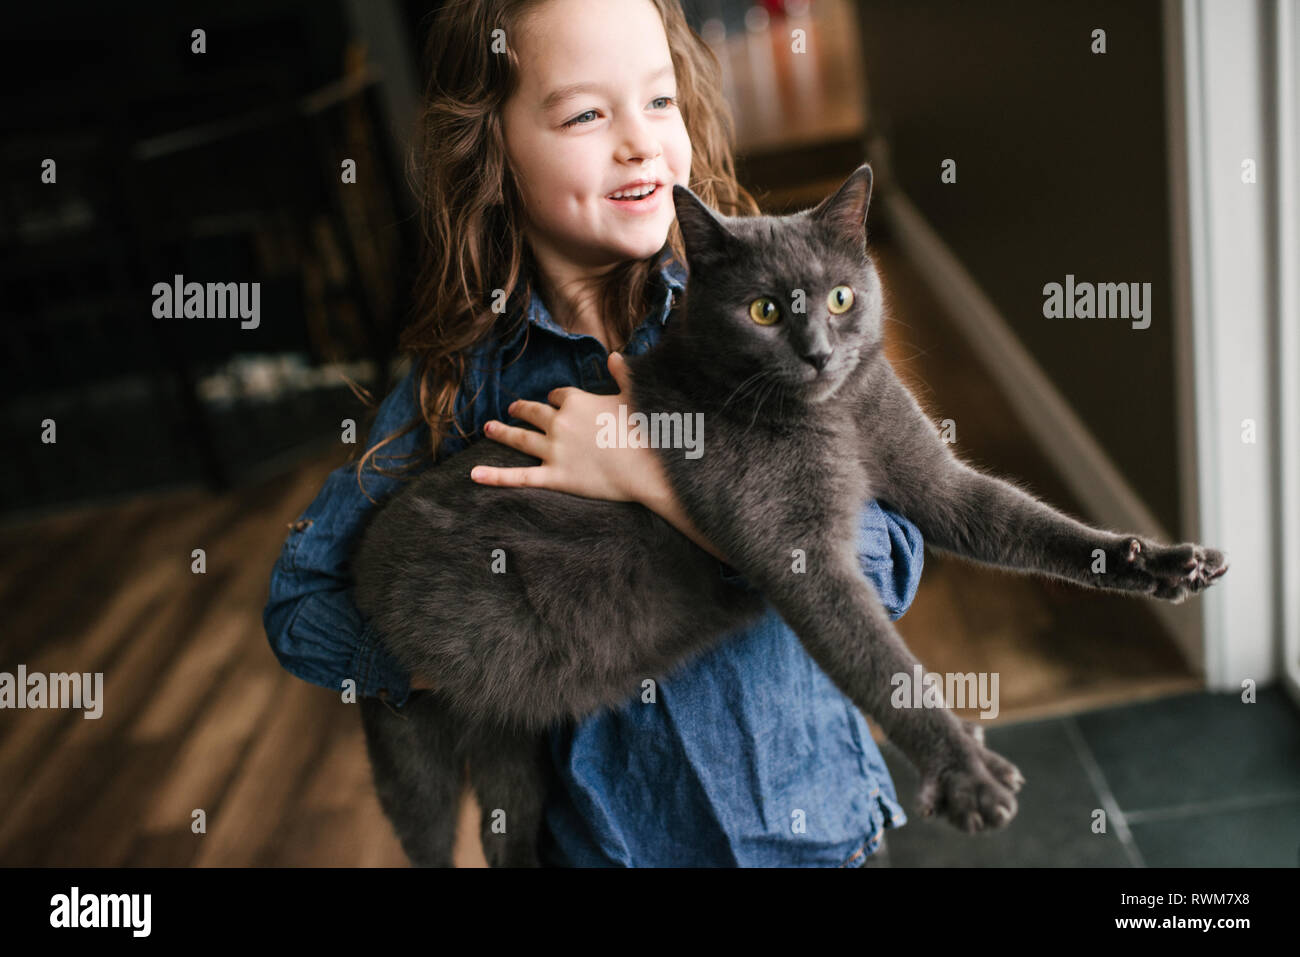 Little girl playing with cat at home Stock Photo